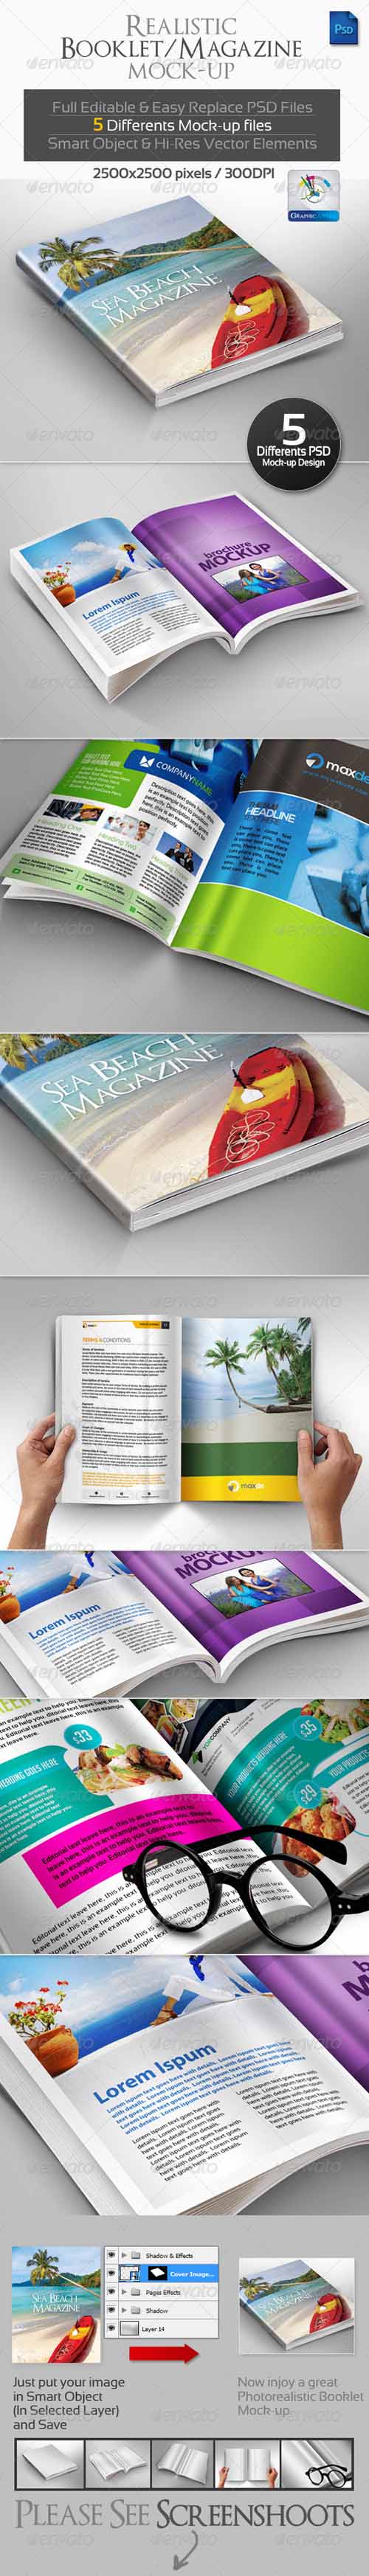 Realistic Booklet Magazine Mock-up Templates